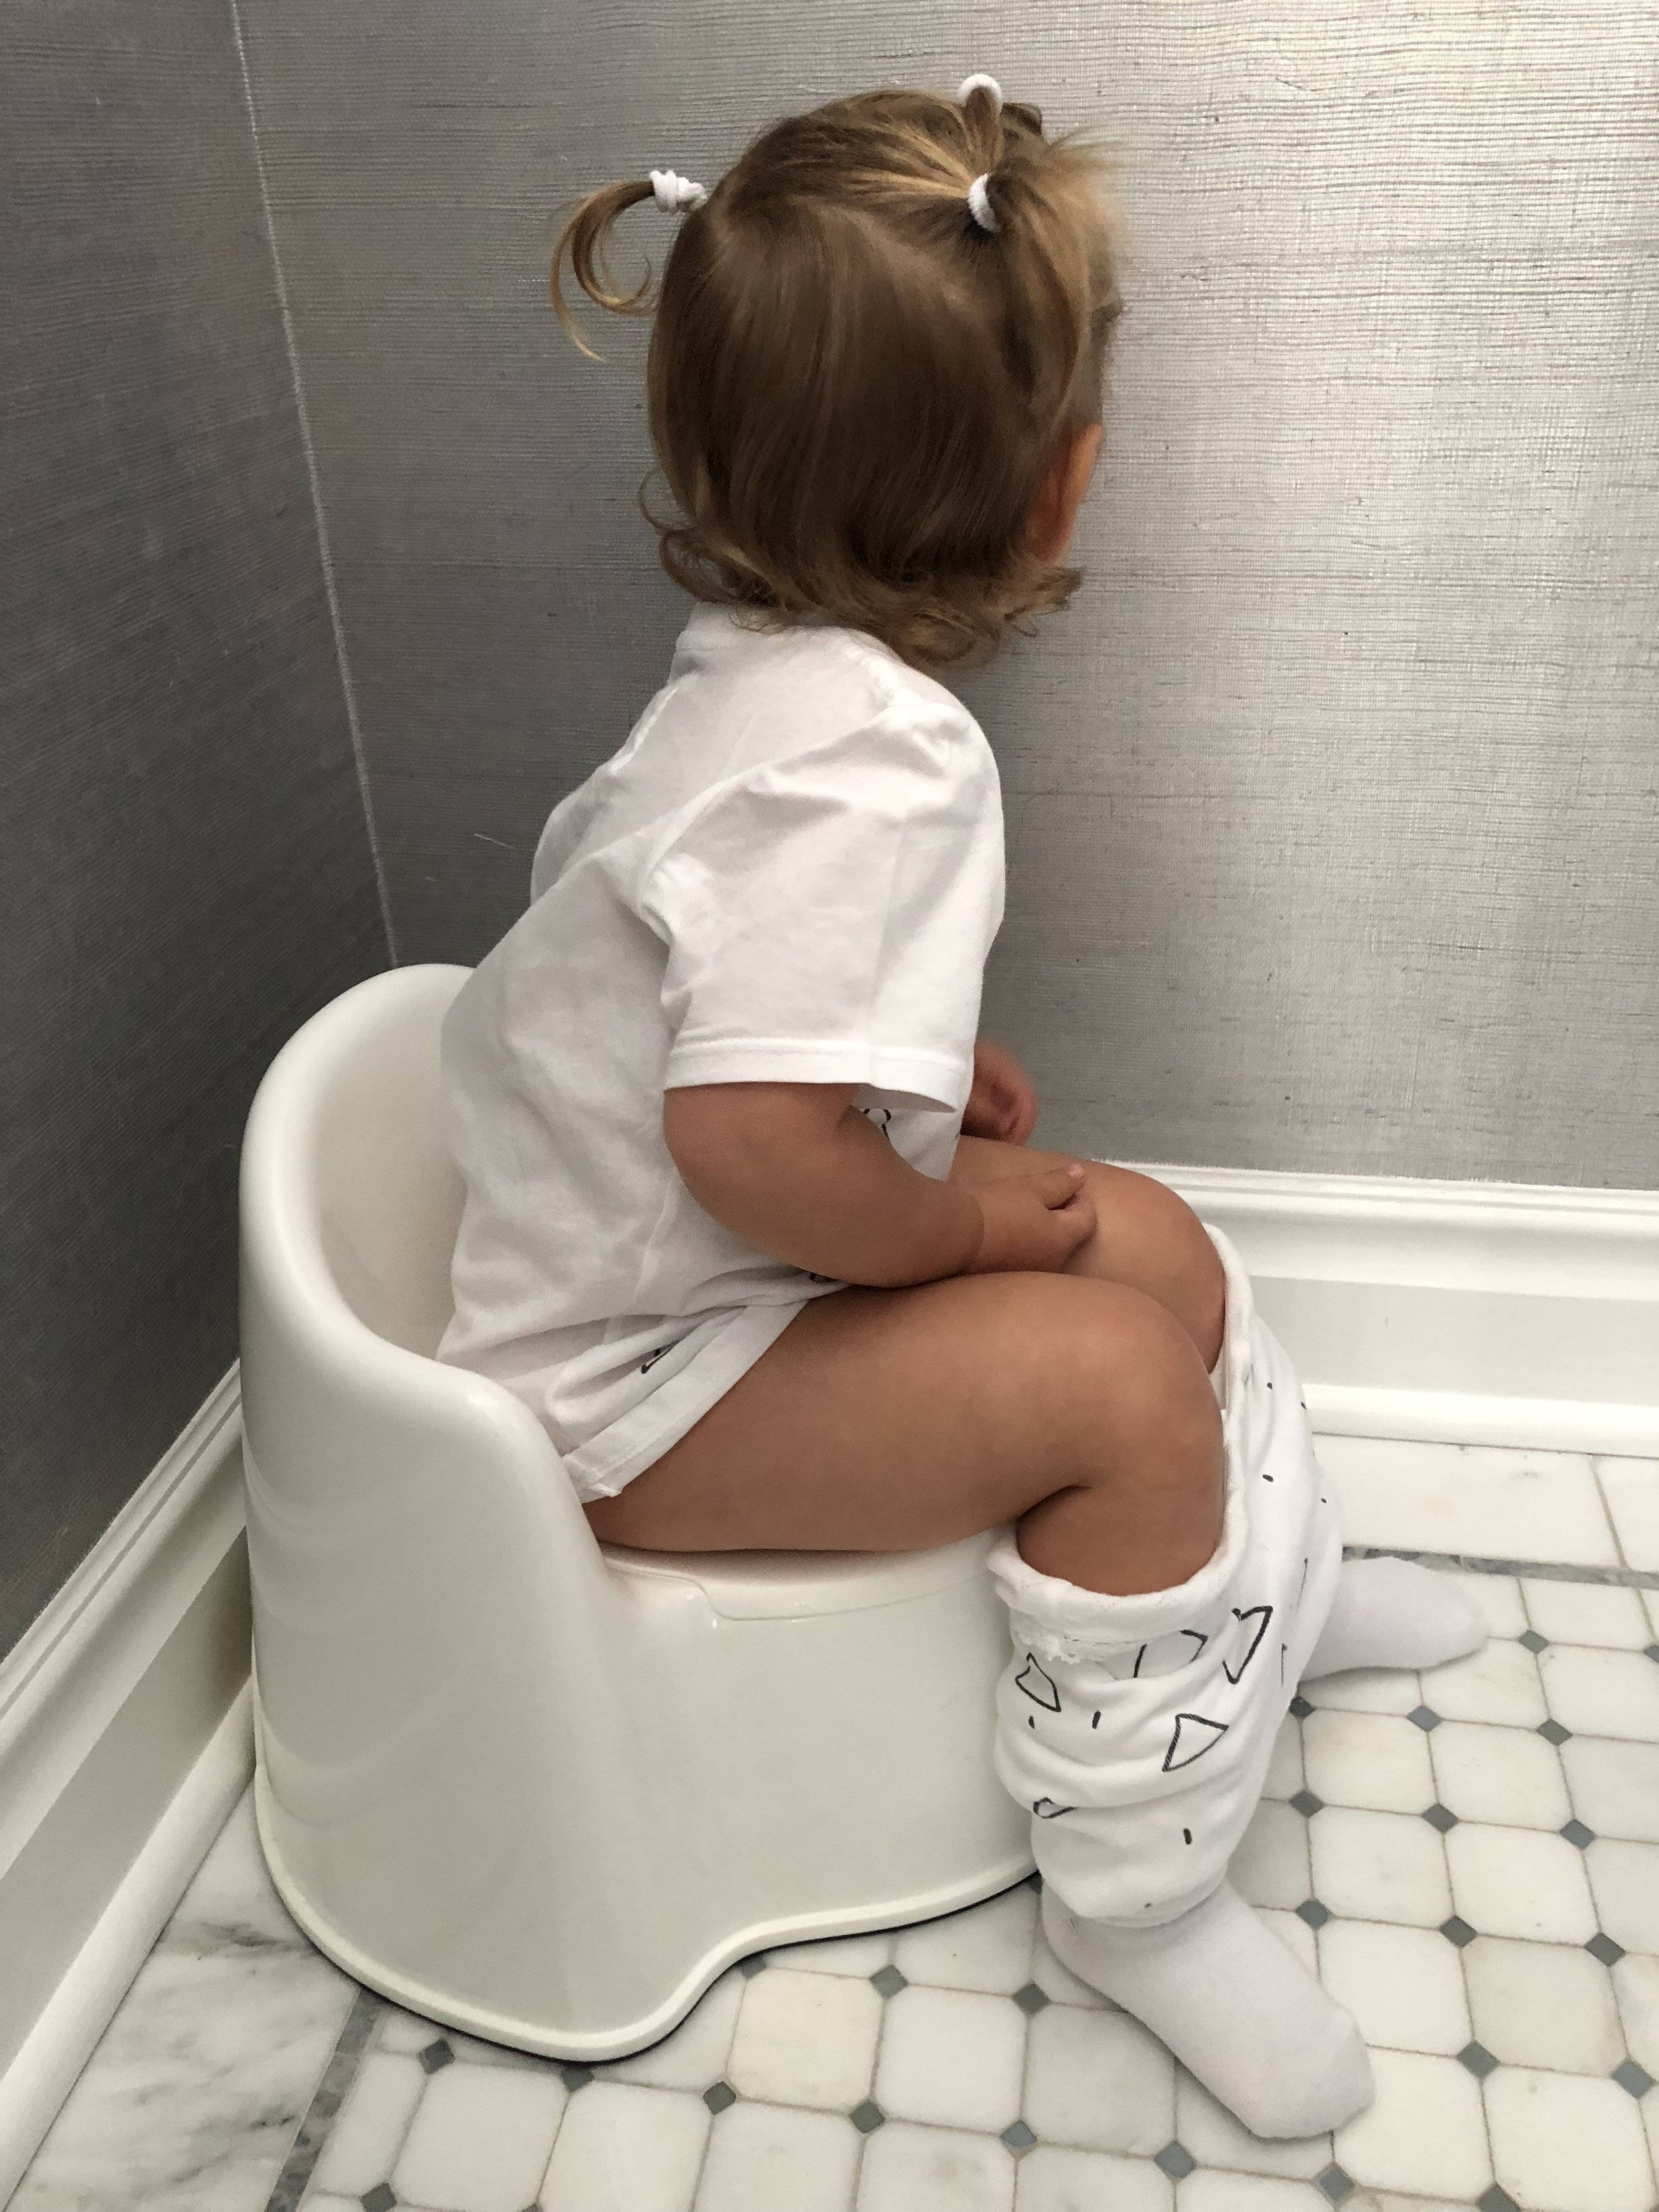 Potty training methods: Which is best for your child?